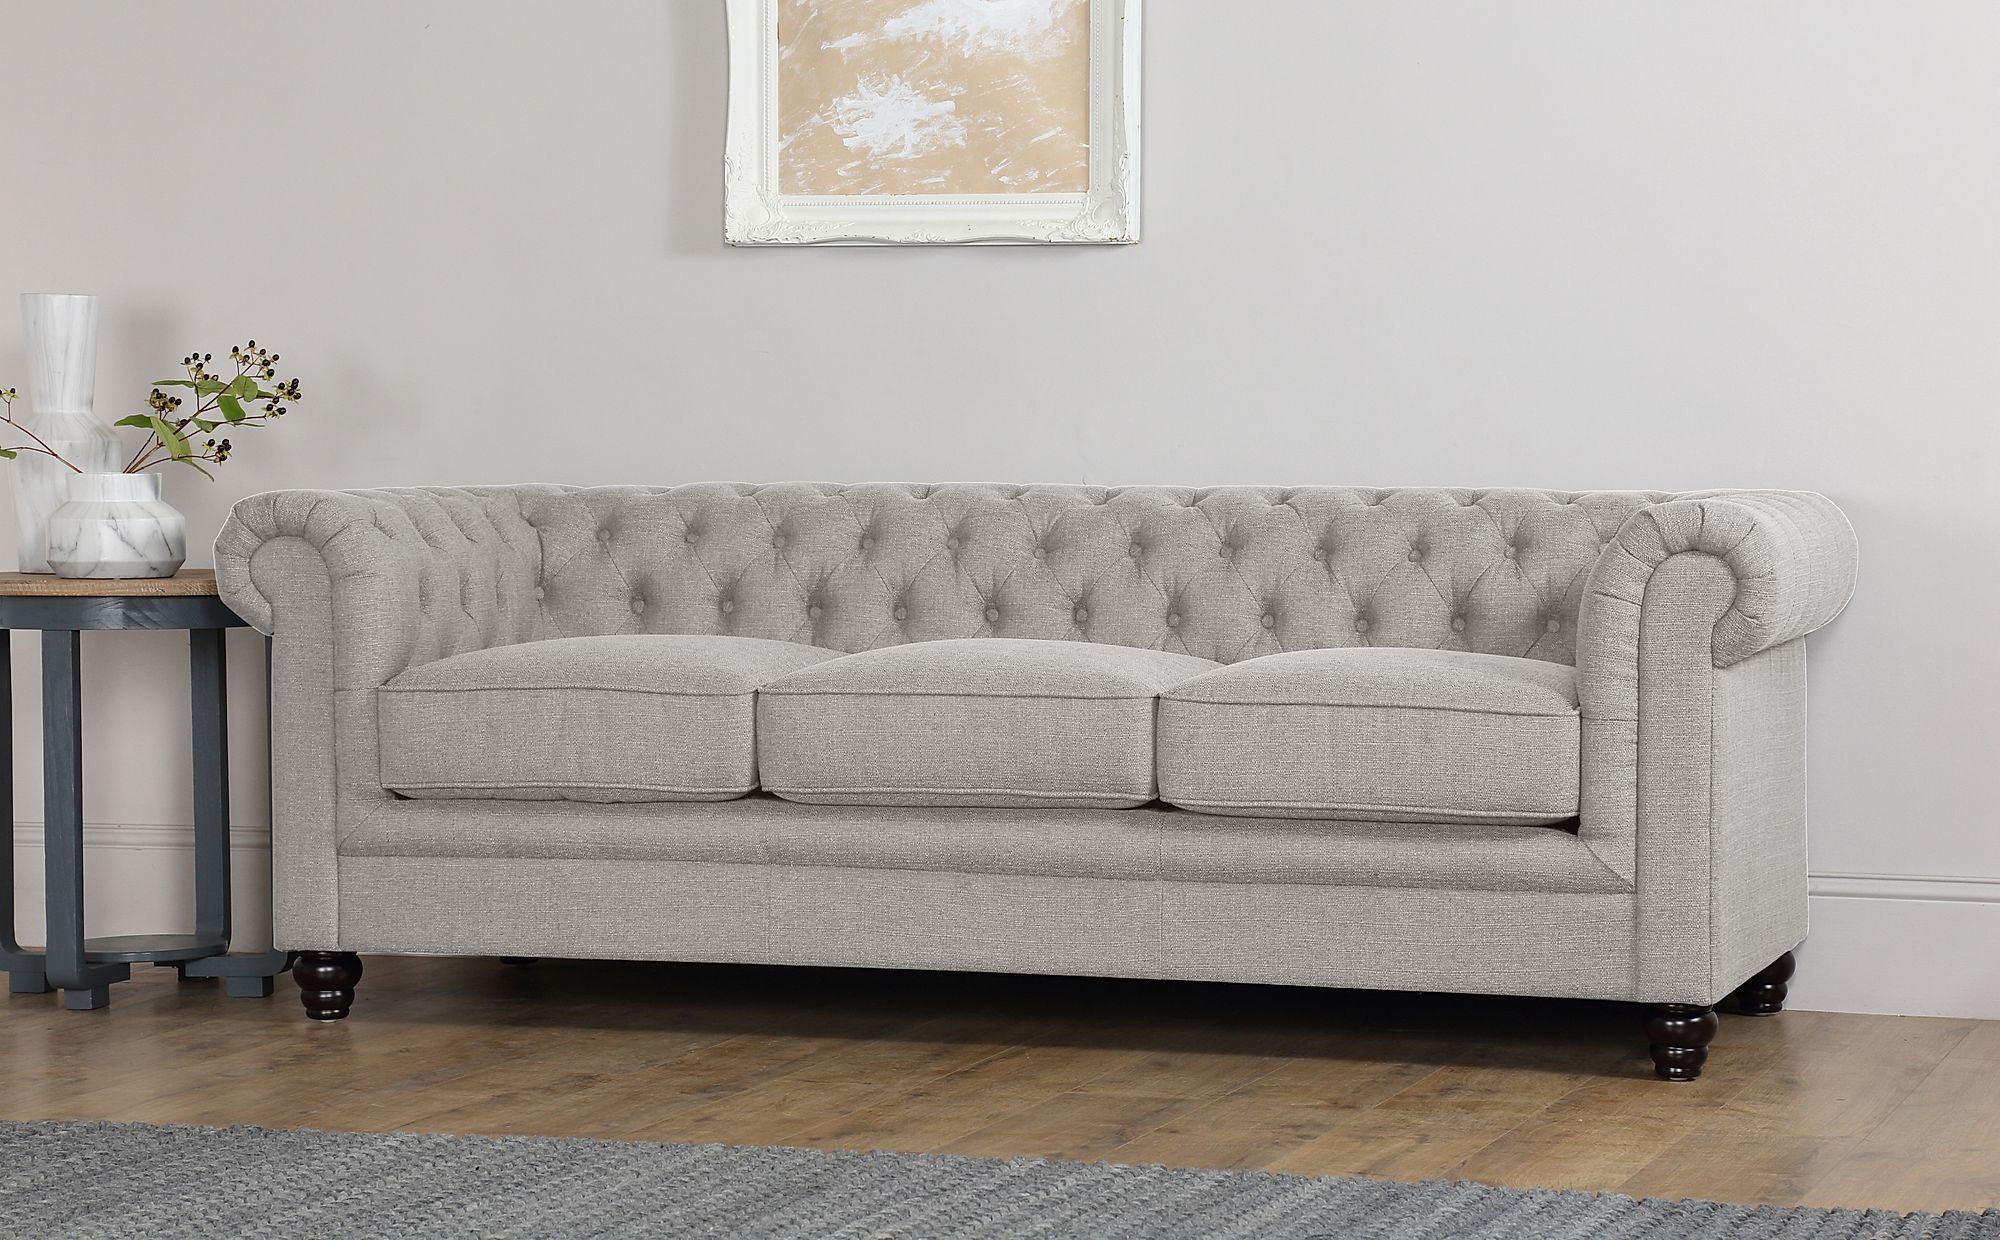 Hampton Light Grey Fabric 3 Seater Chesterfield Sofa | Furniture Choice In Sofas In Light Gray (Gallery 13 of 22)